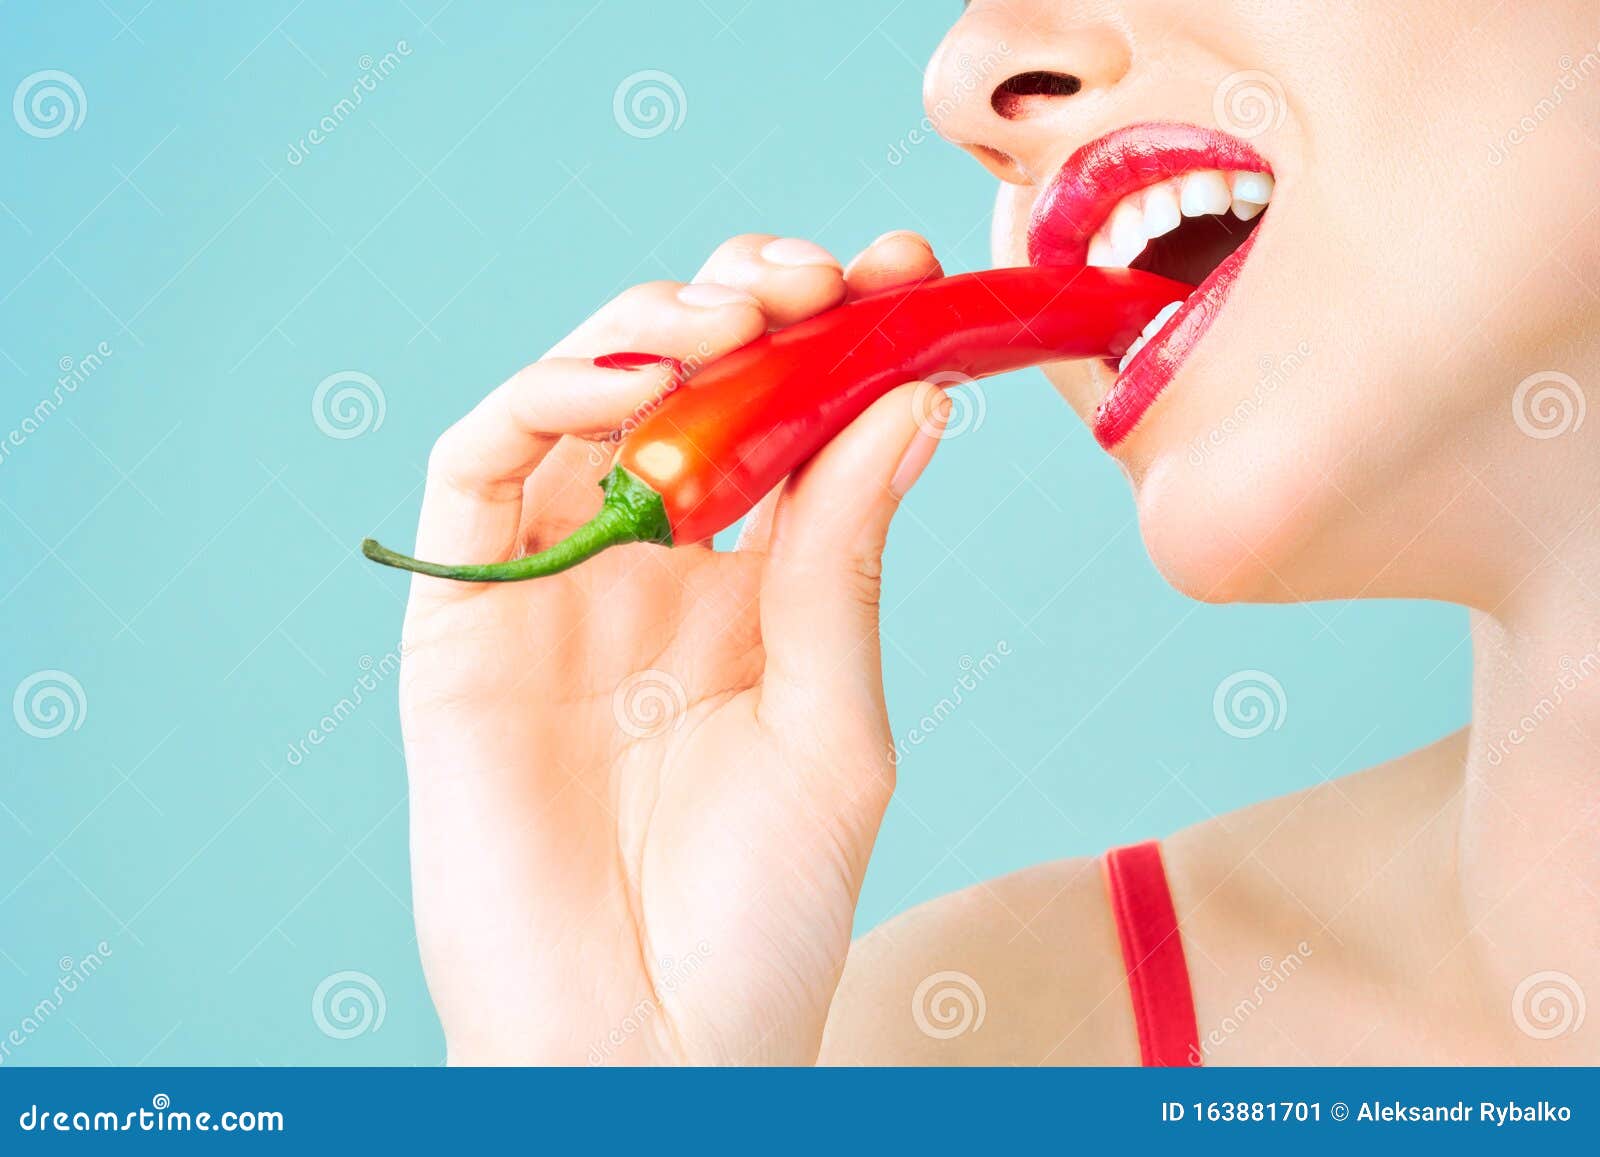 Sexy Red Peppers